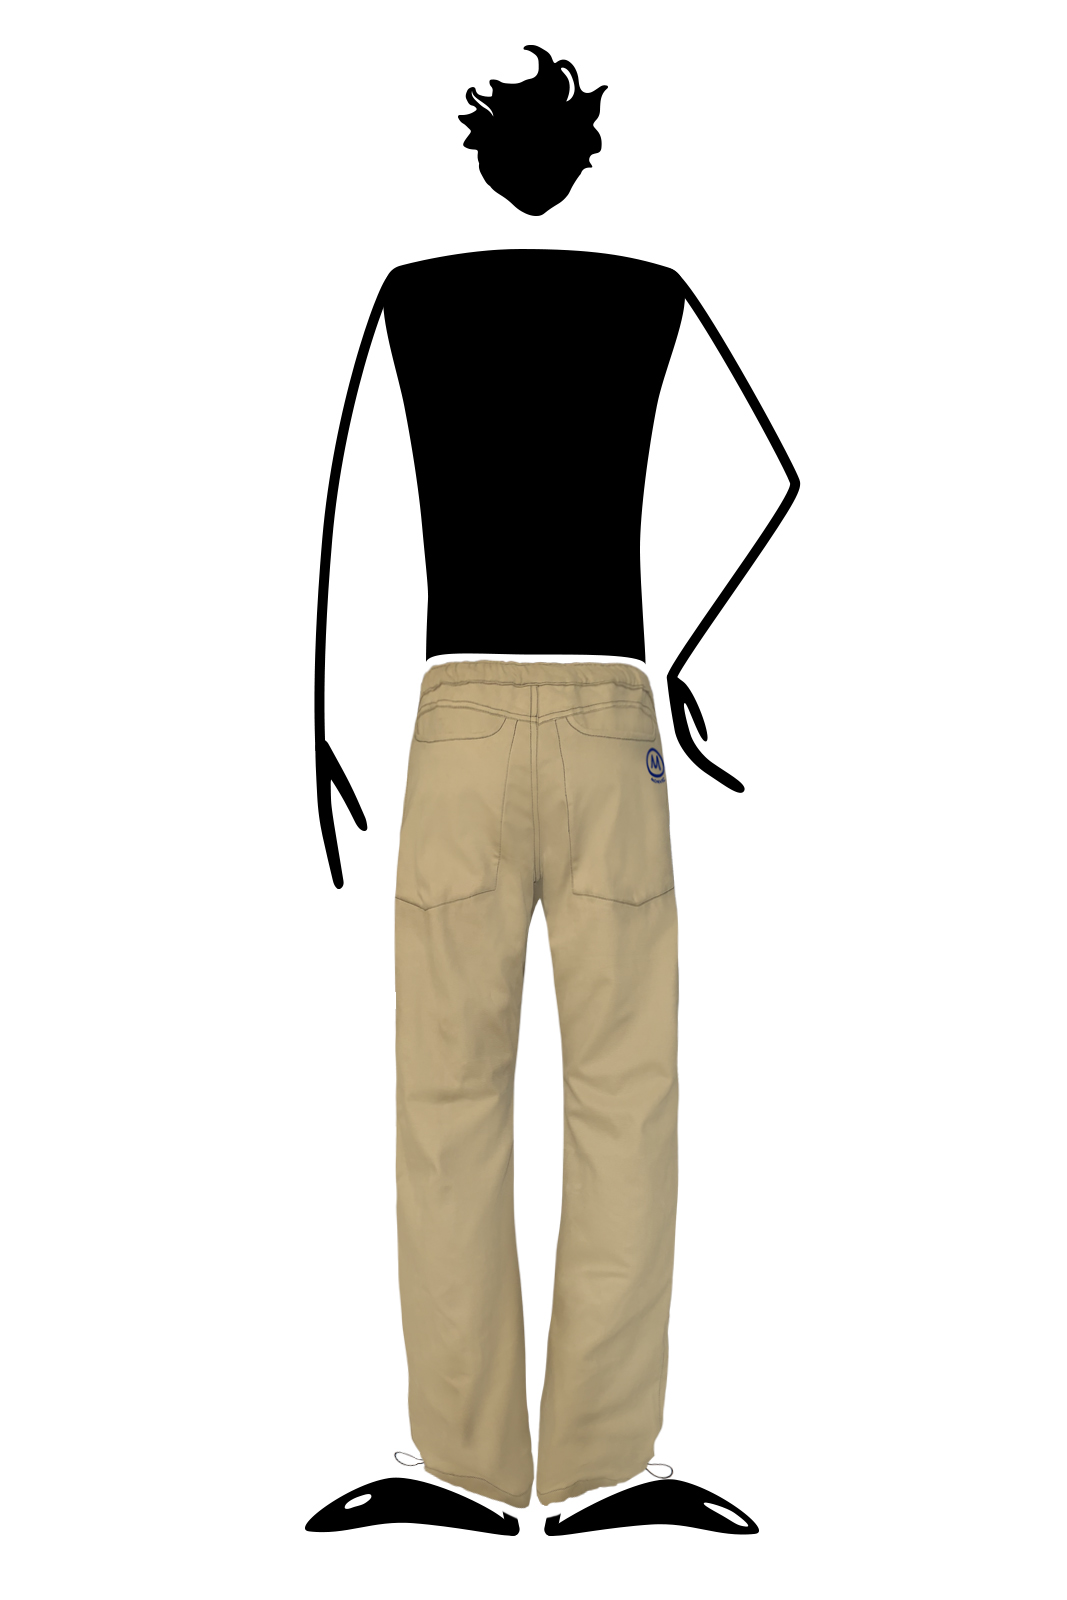 Men's trousers for climbing CLYDE Monvic